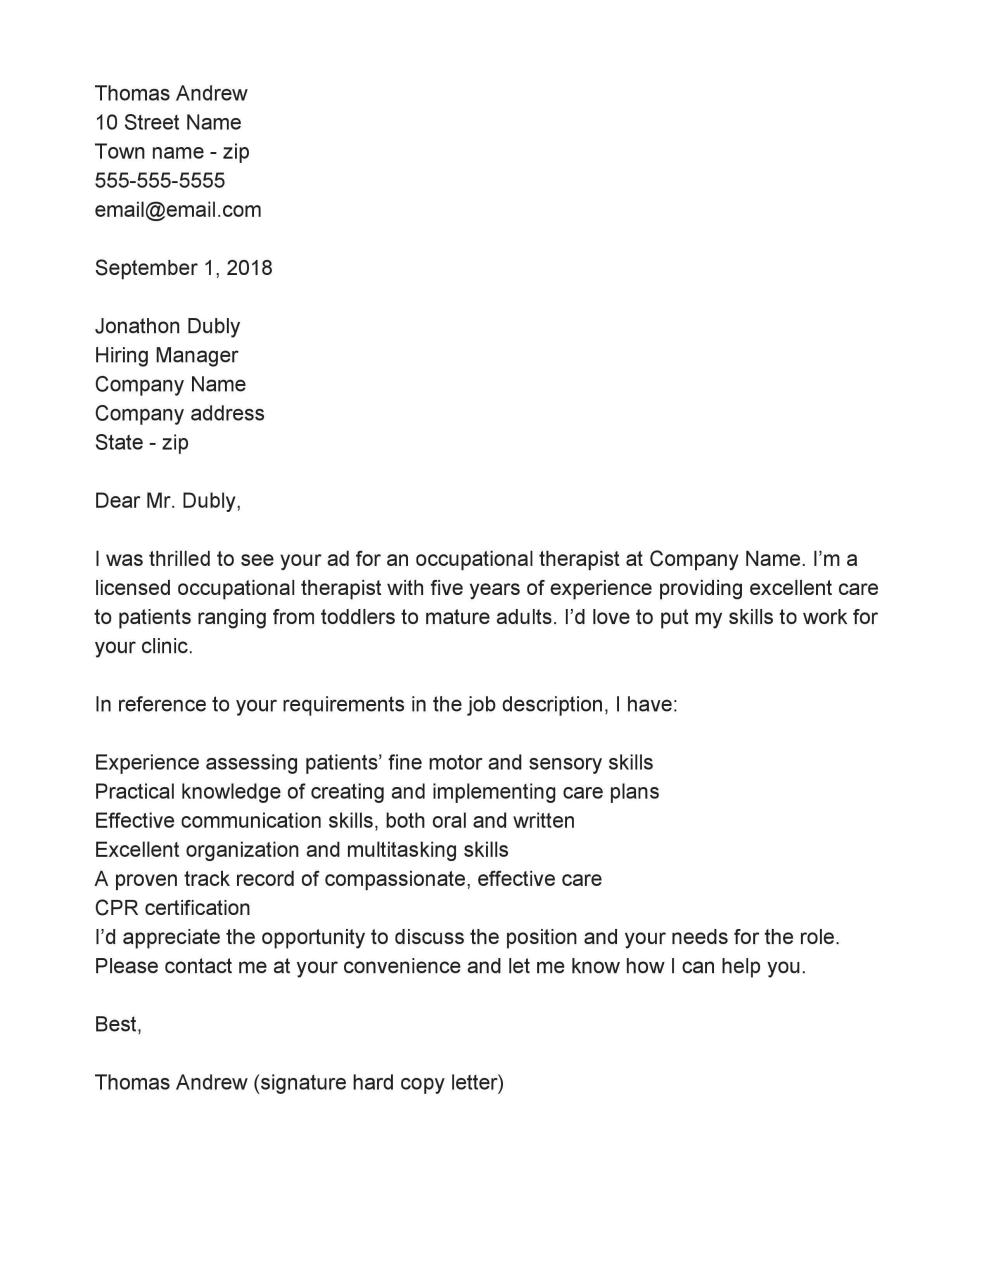 How To Write A Cover Letter For Job Format, Example, Importance How